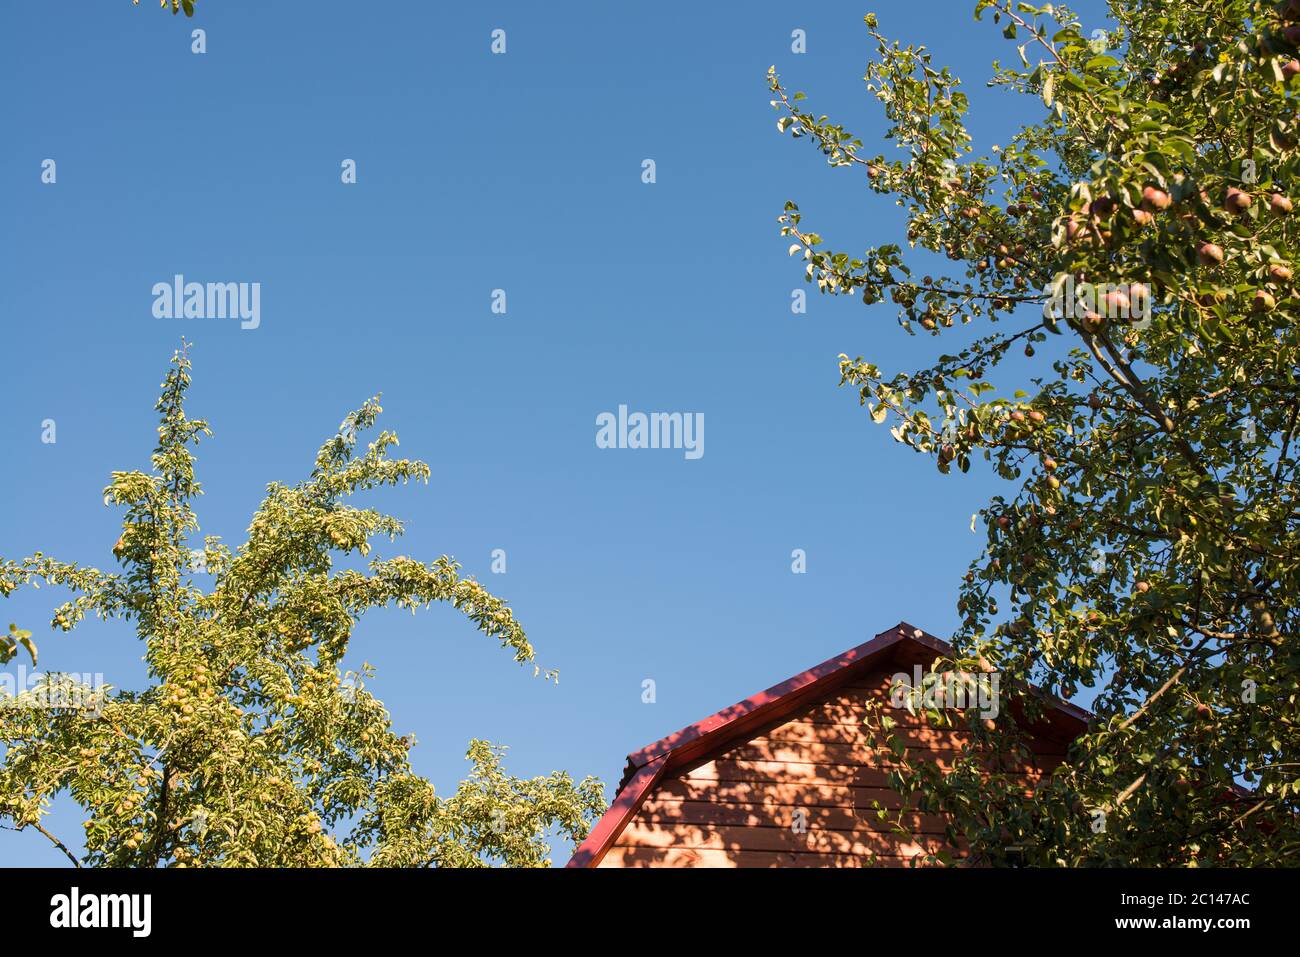 ripe pears hanging on a tree branch on the background of the house roof and deep blue sky Stock Photo